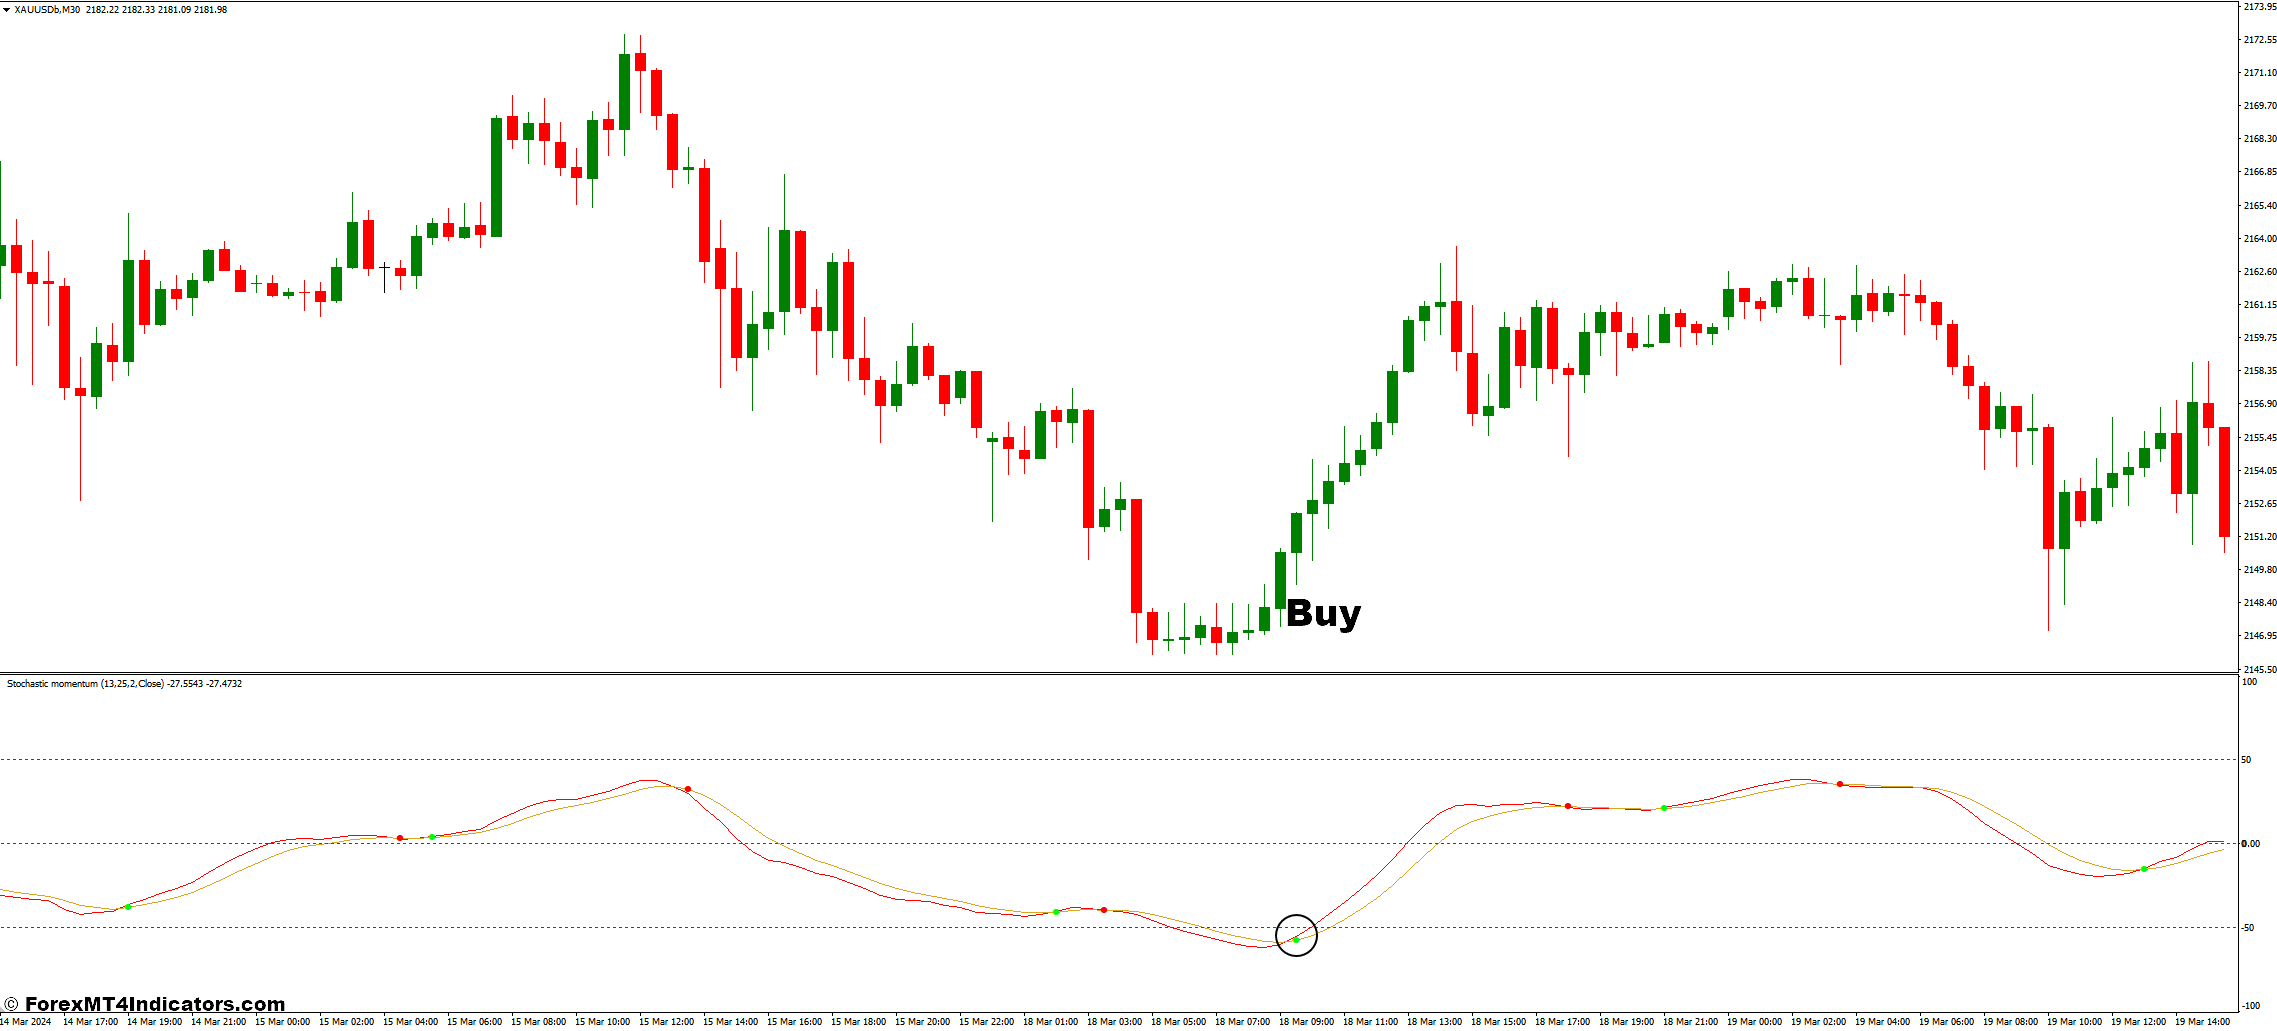 How to Trade with Stochastic Momentum with Arrows Indicator - Buy Entry